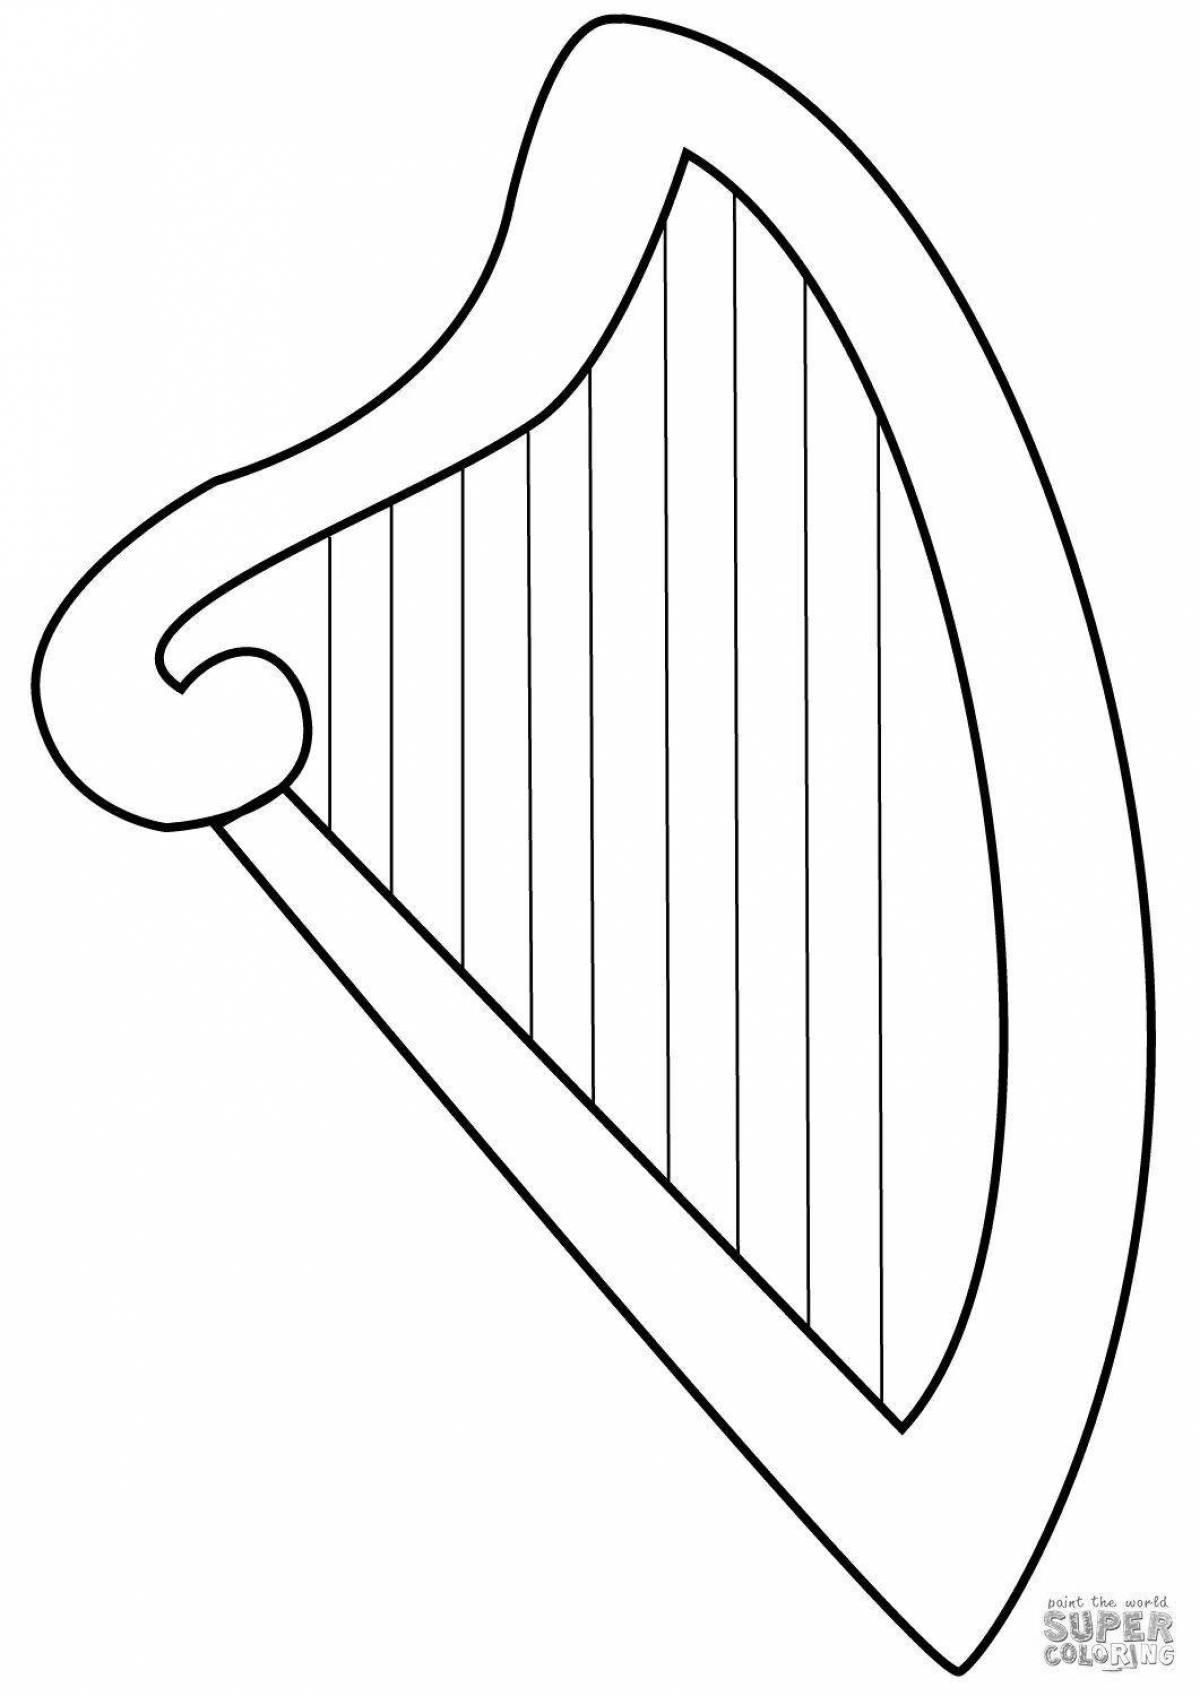 Glorious harp coloring pages for kids